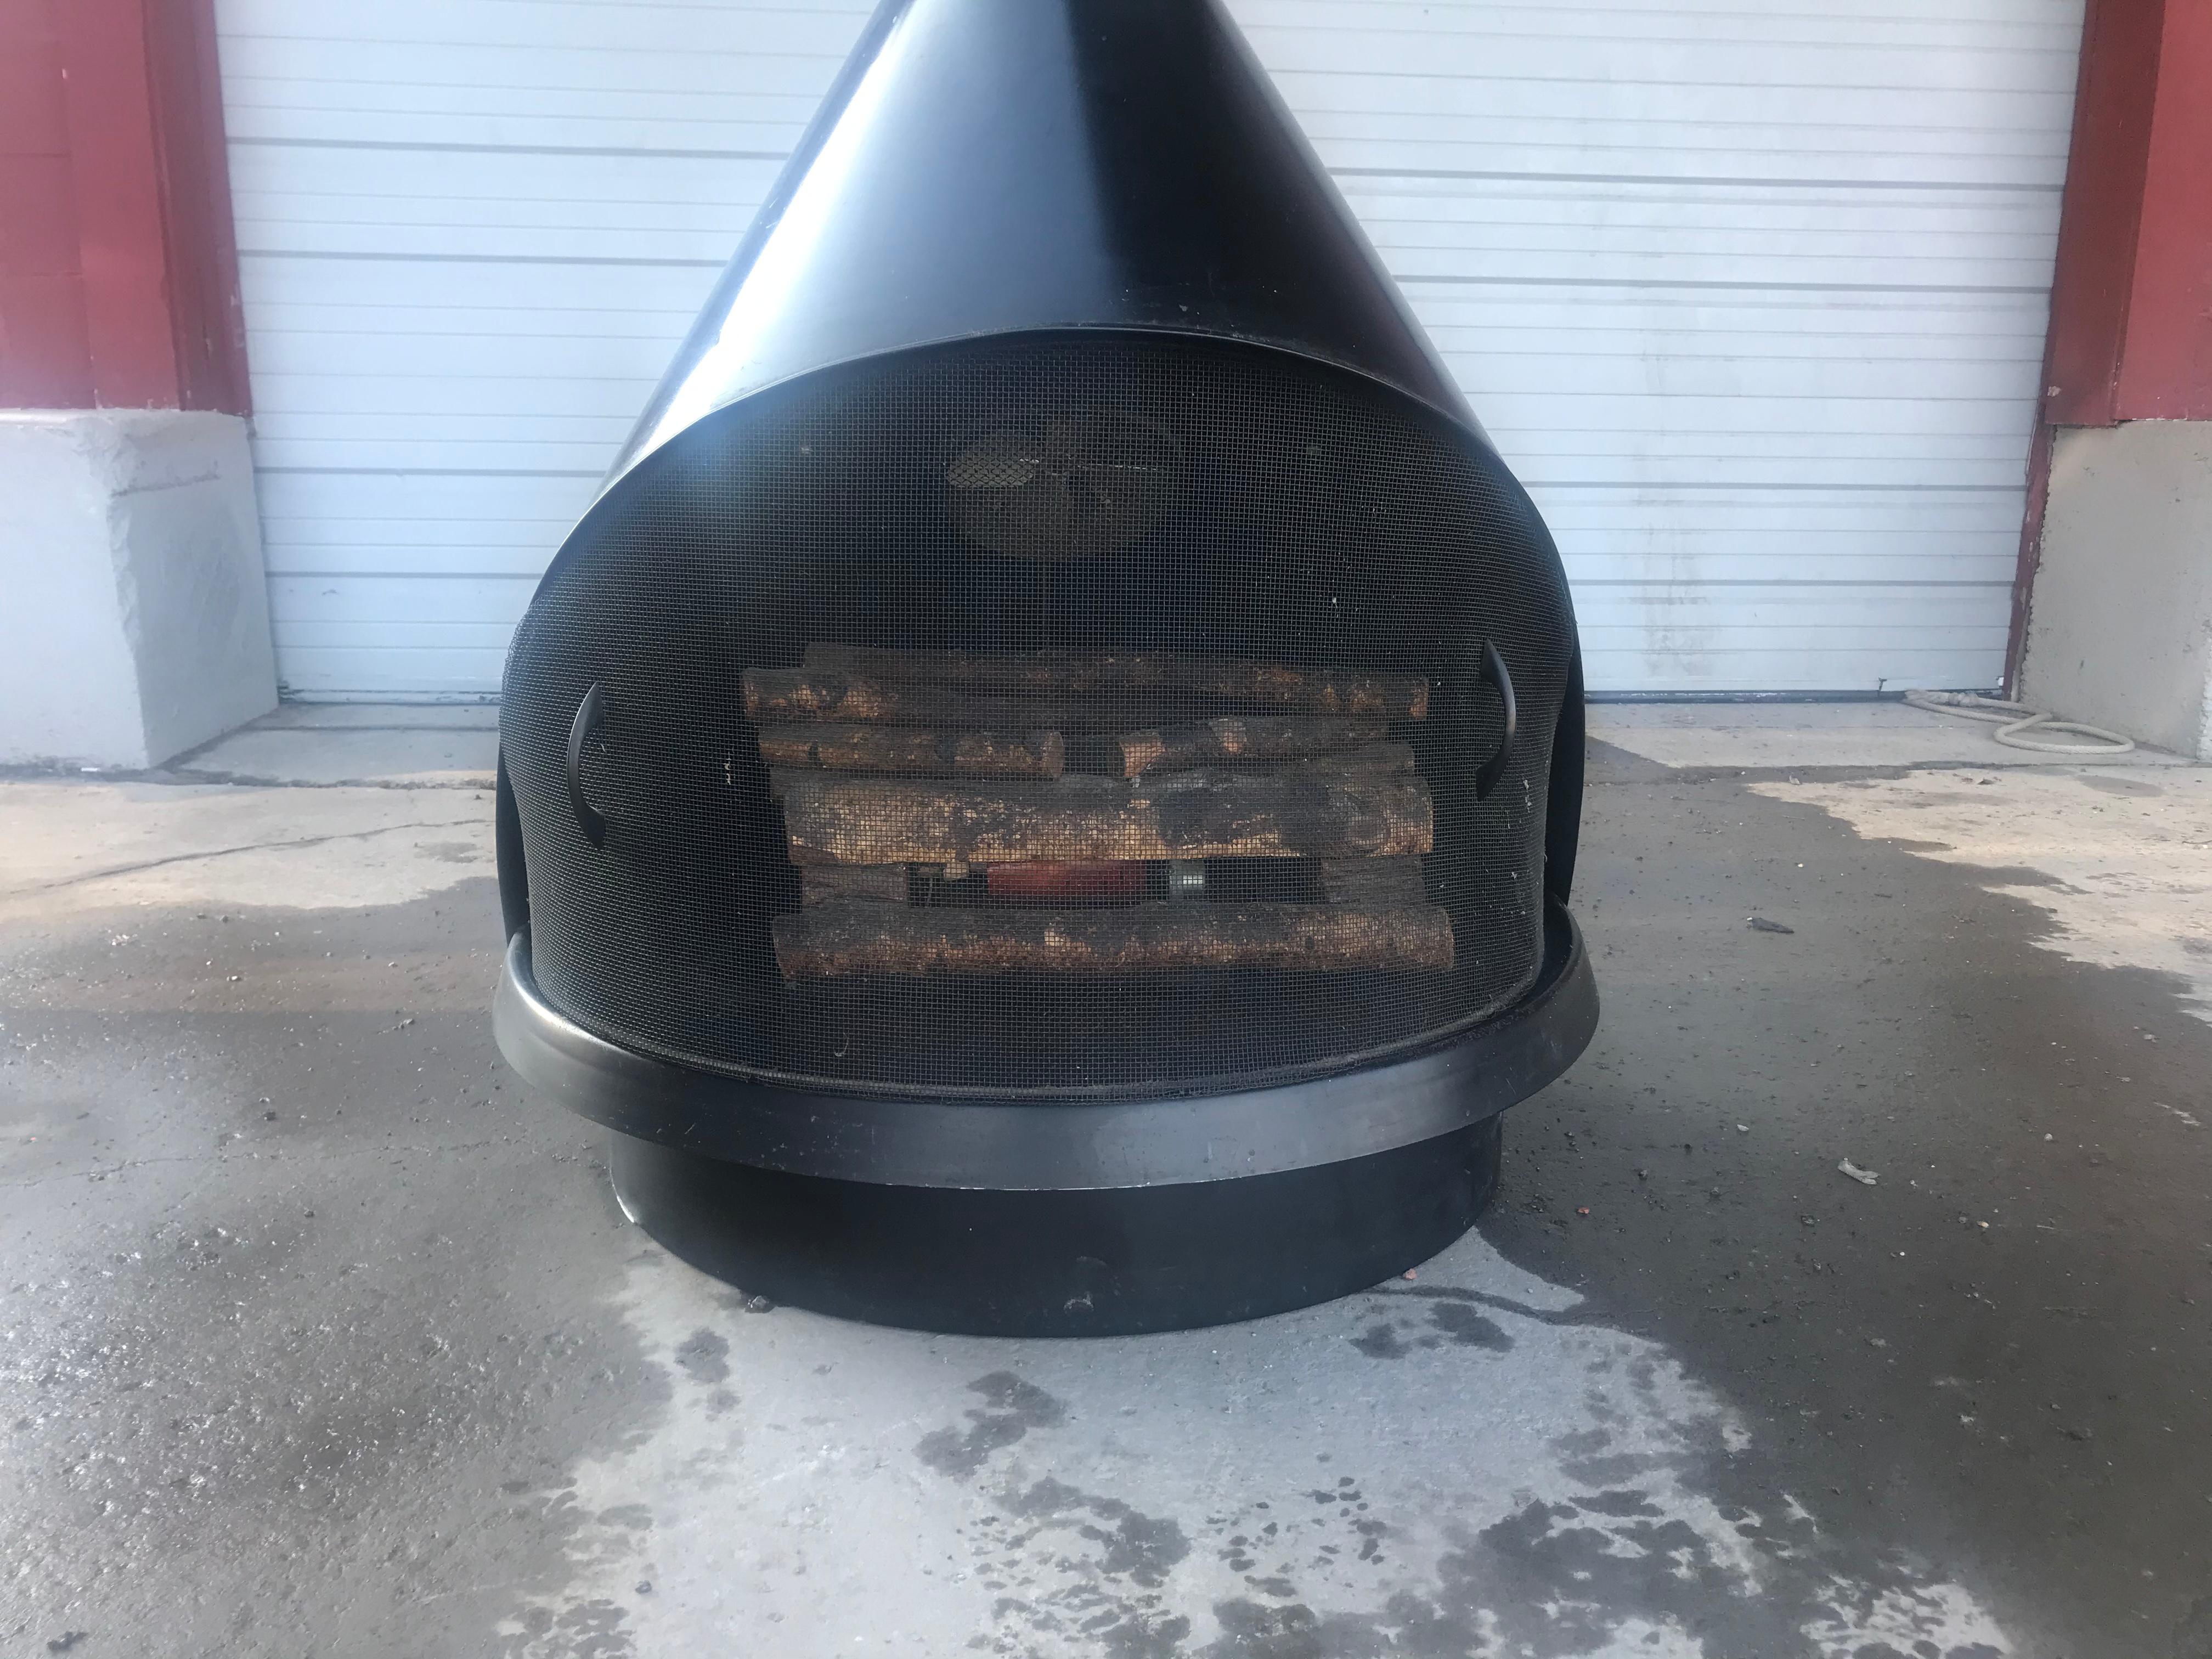 Vintage Preway Mid-Century Modern cone electric fireplace, iconic design, original black finish. Complete with heat element, logs and fan, tested and working perfectly, adjustable height from 72